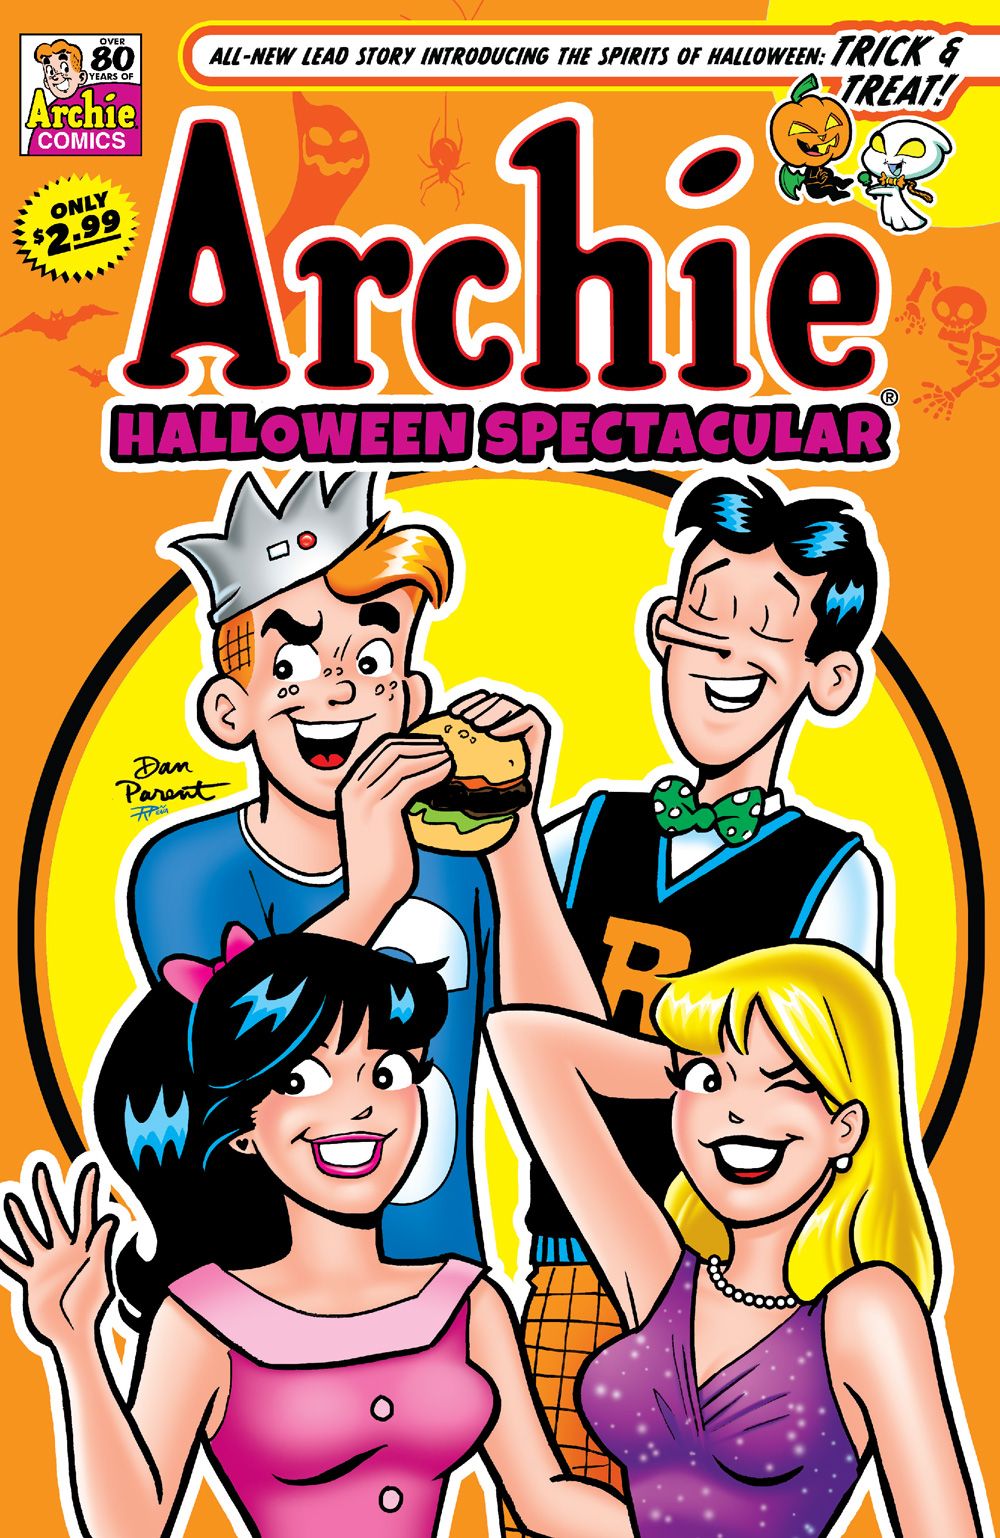 EXCLUSIVE: Archie Comics Introduces Two New Spooky Characters to Riverdale